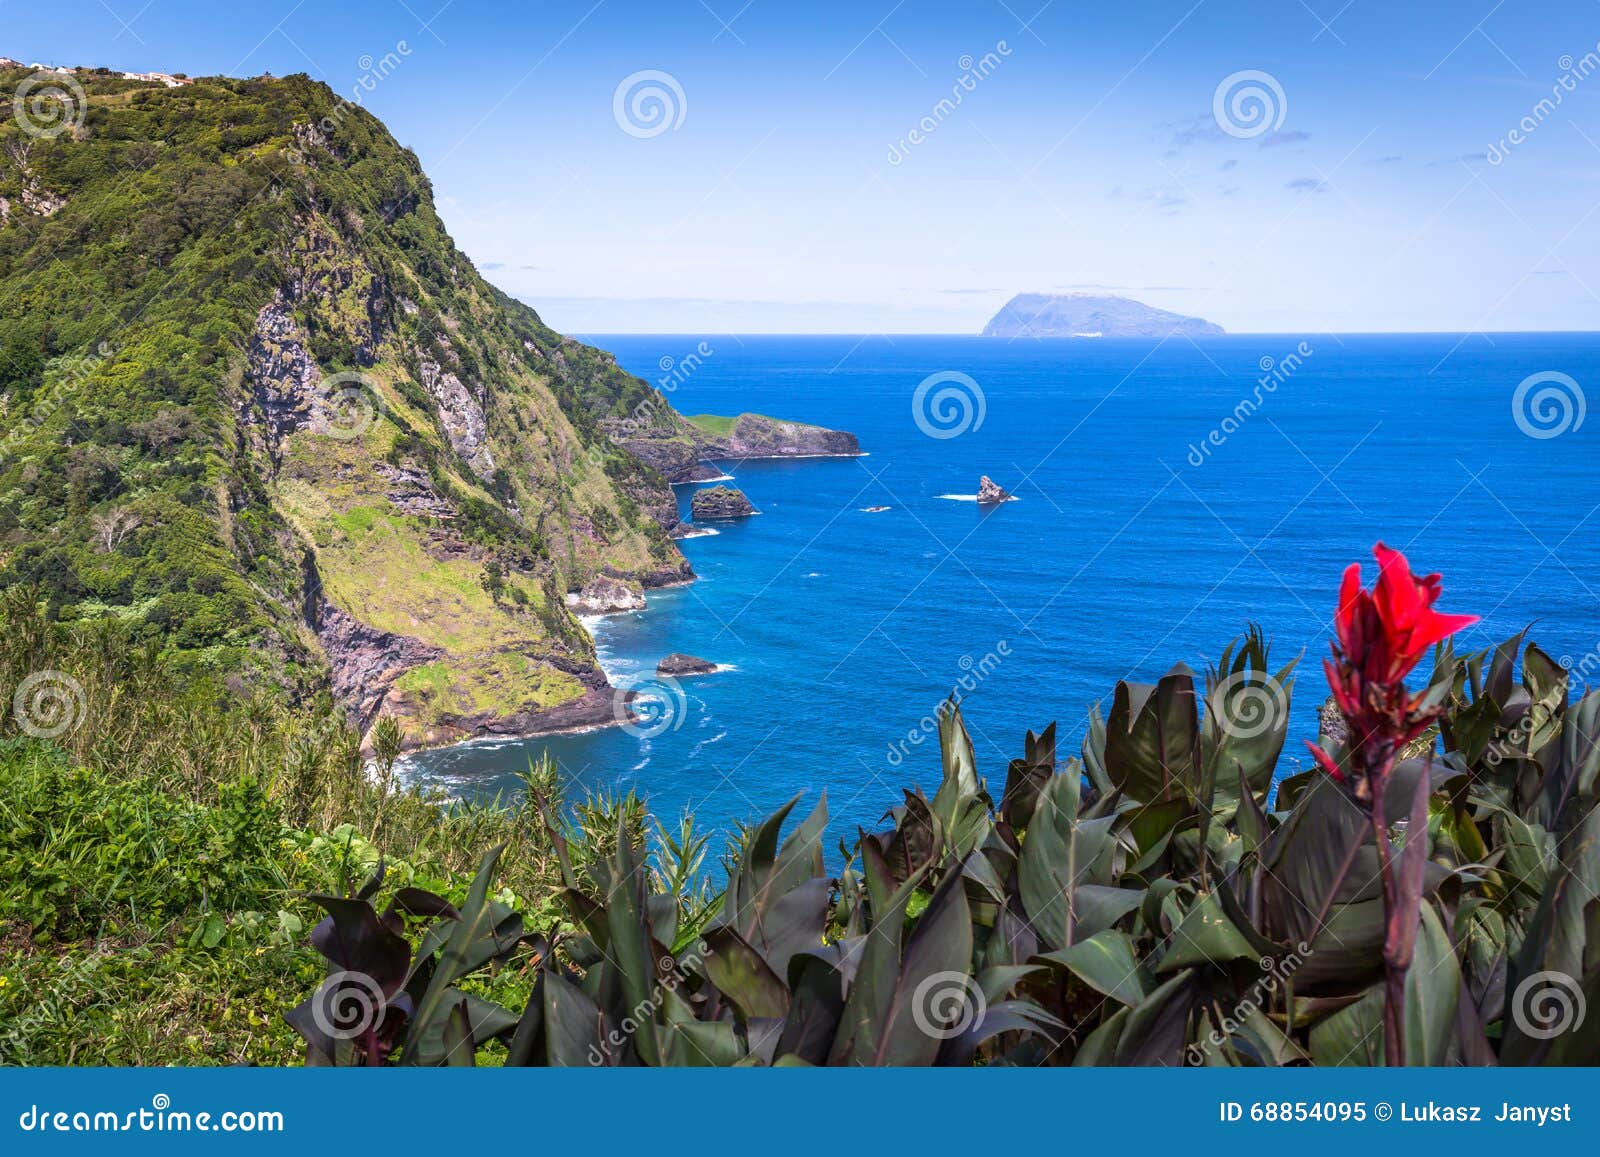 landscape of the island of flores. azores, portugal